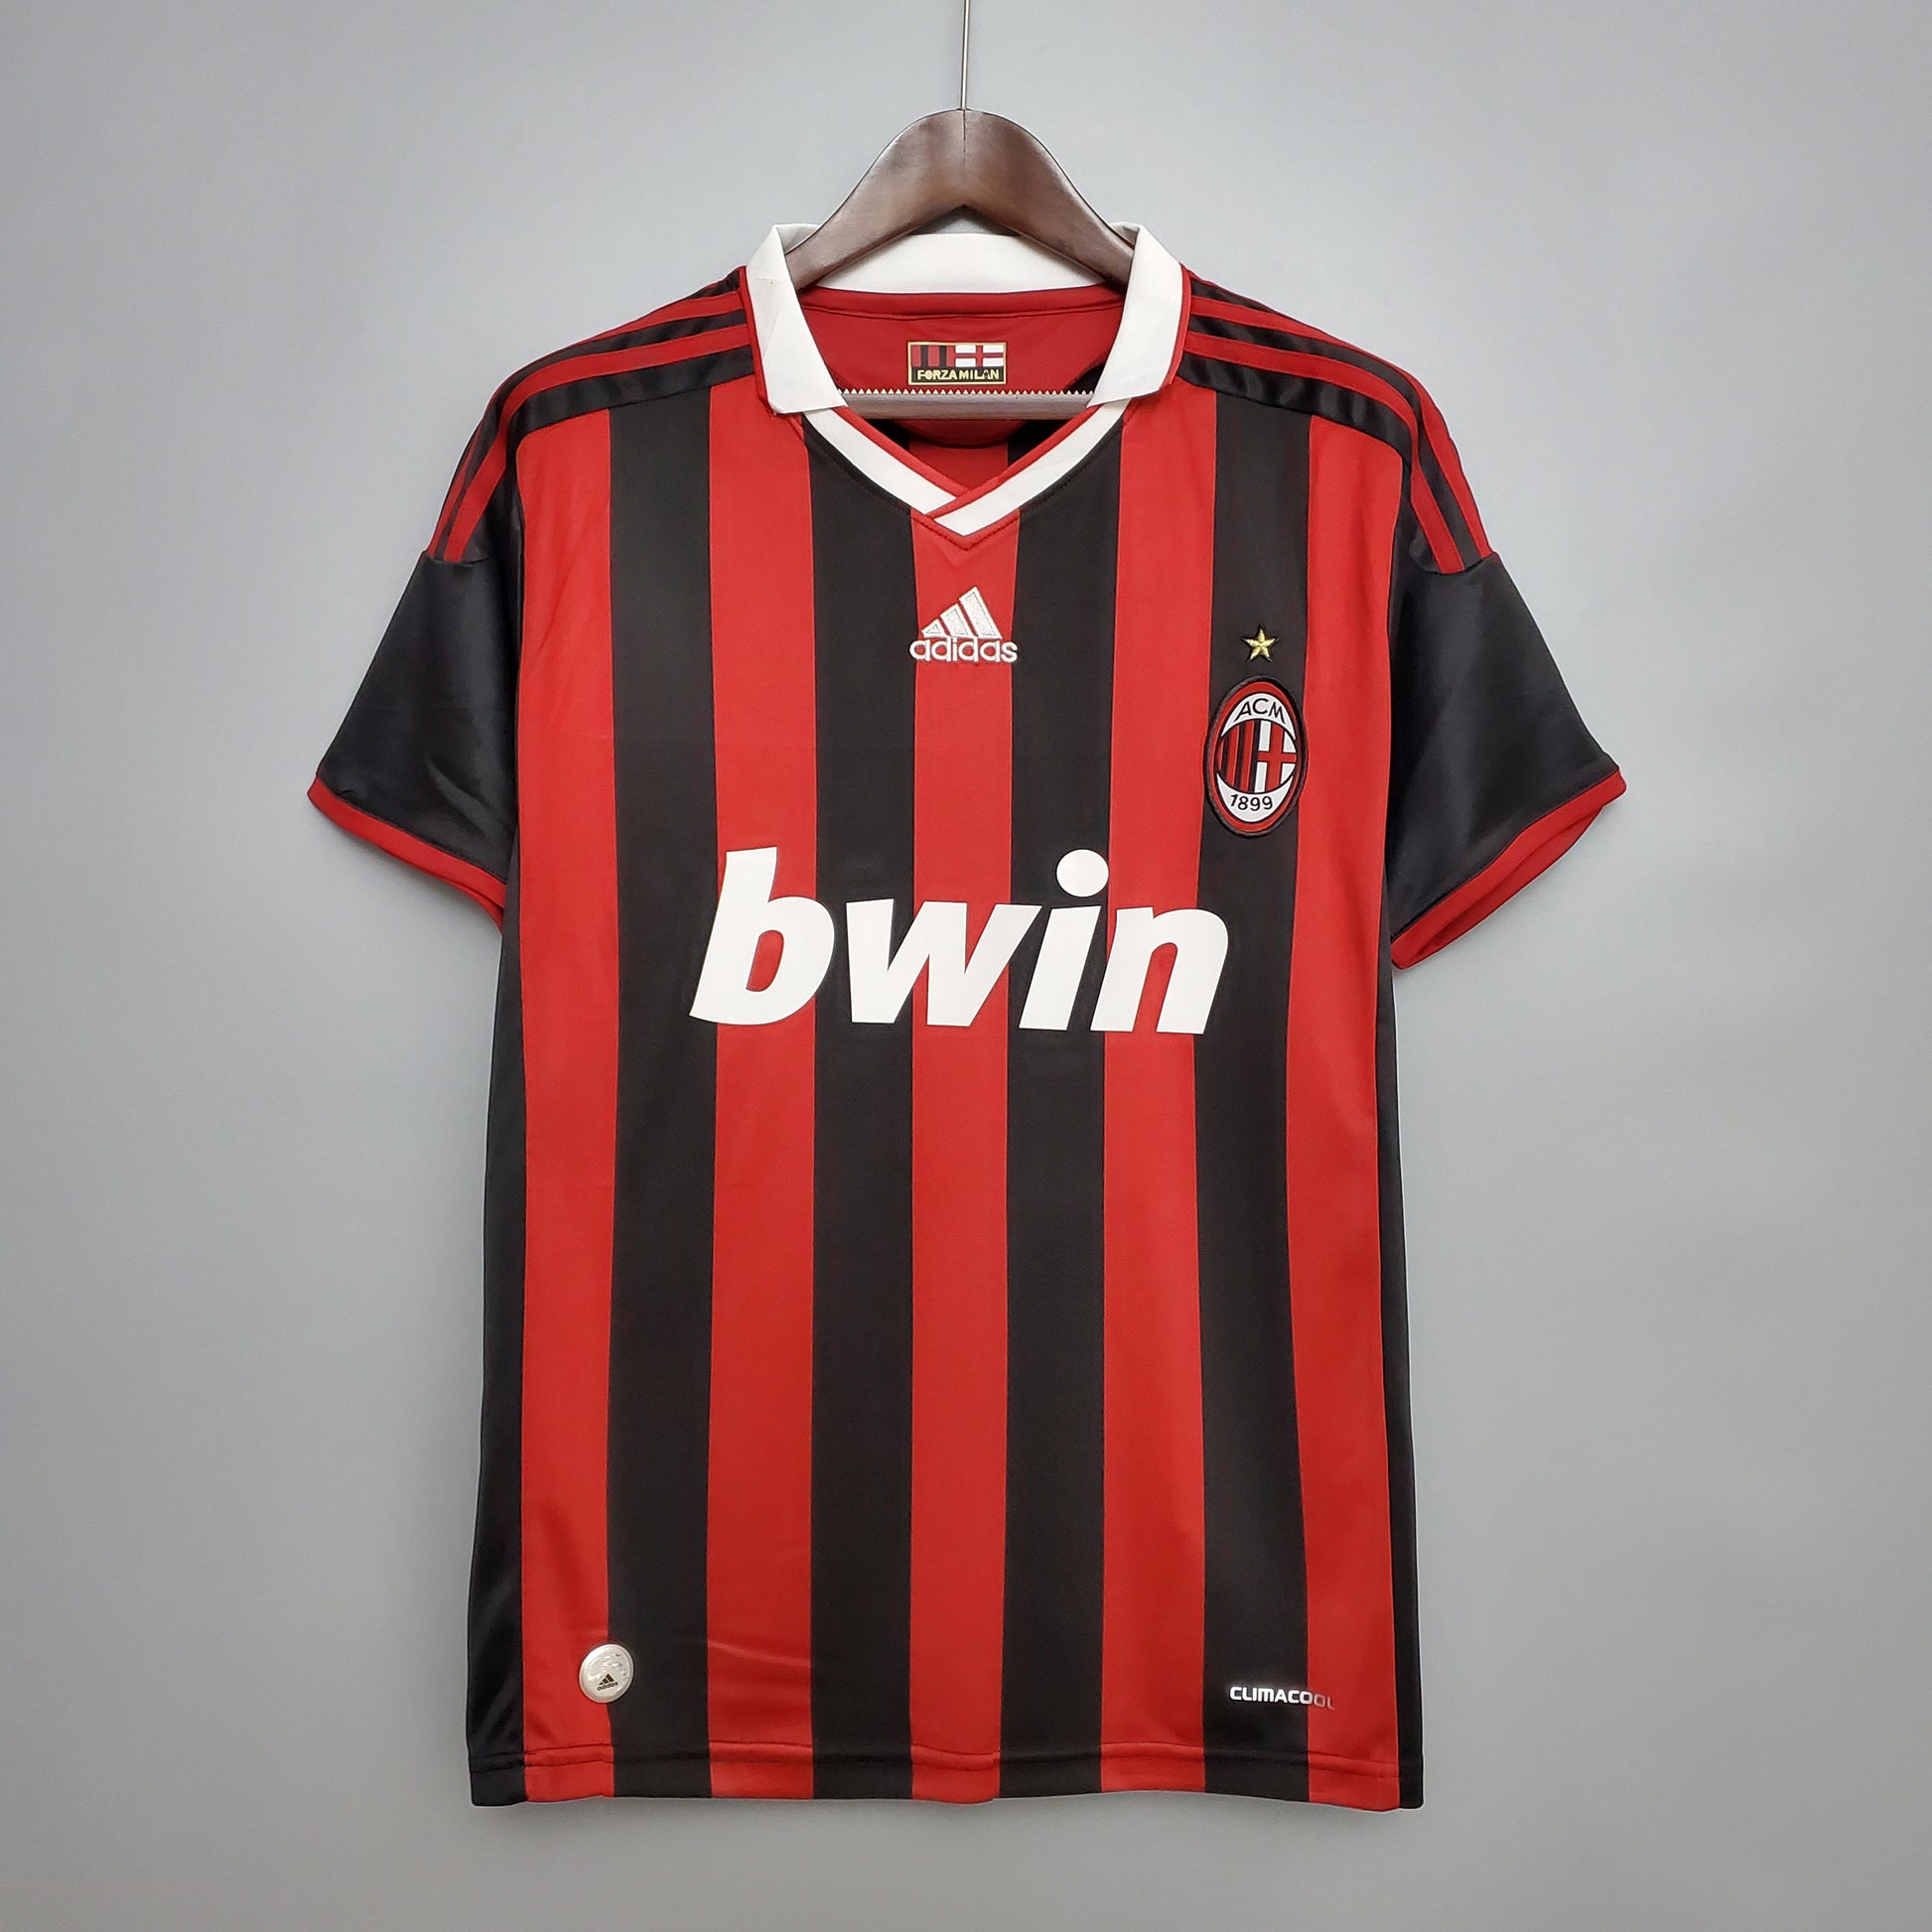 Anyone know where I can get this 2008/09 Ac Milan long sleeve home